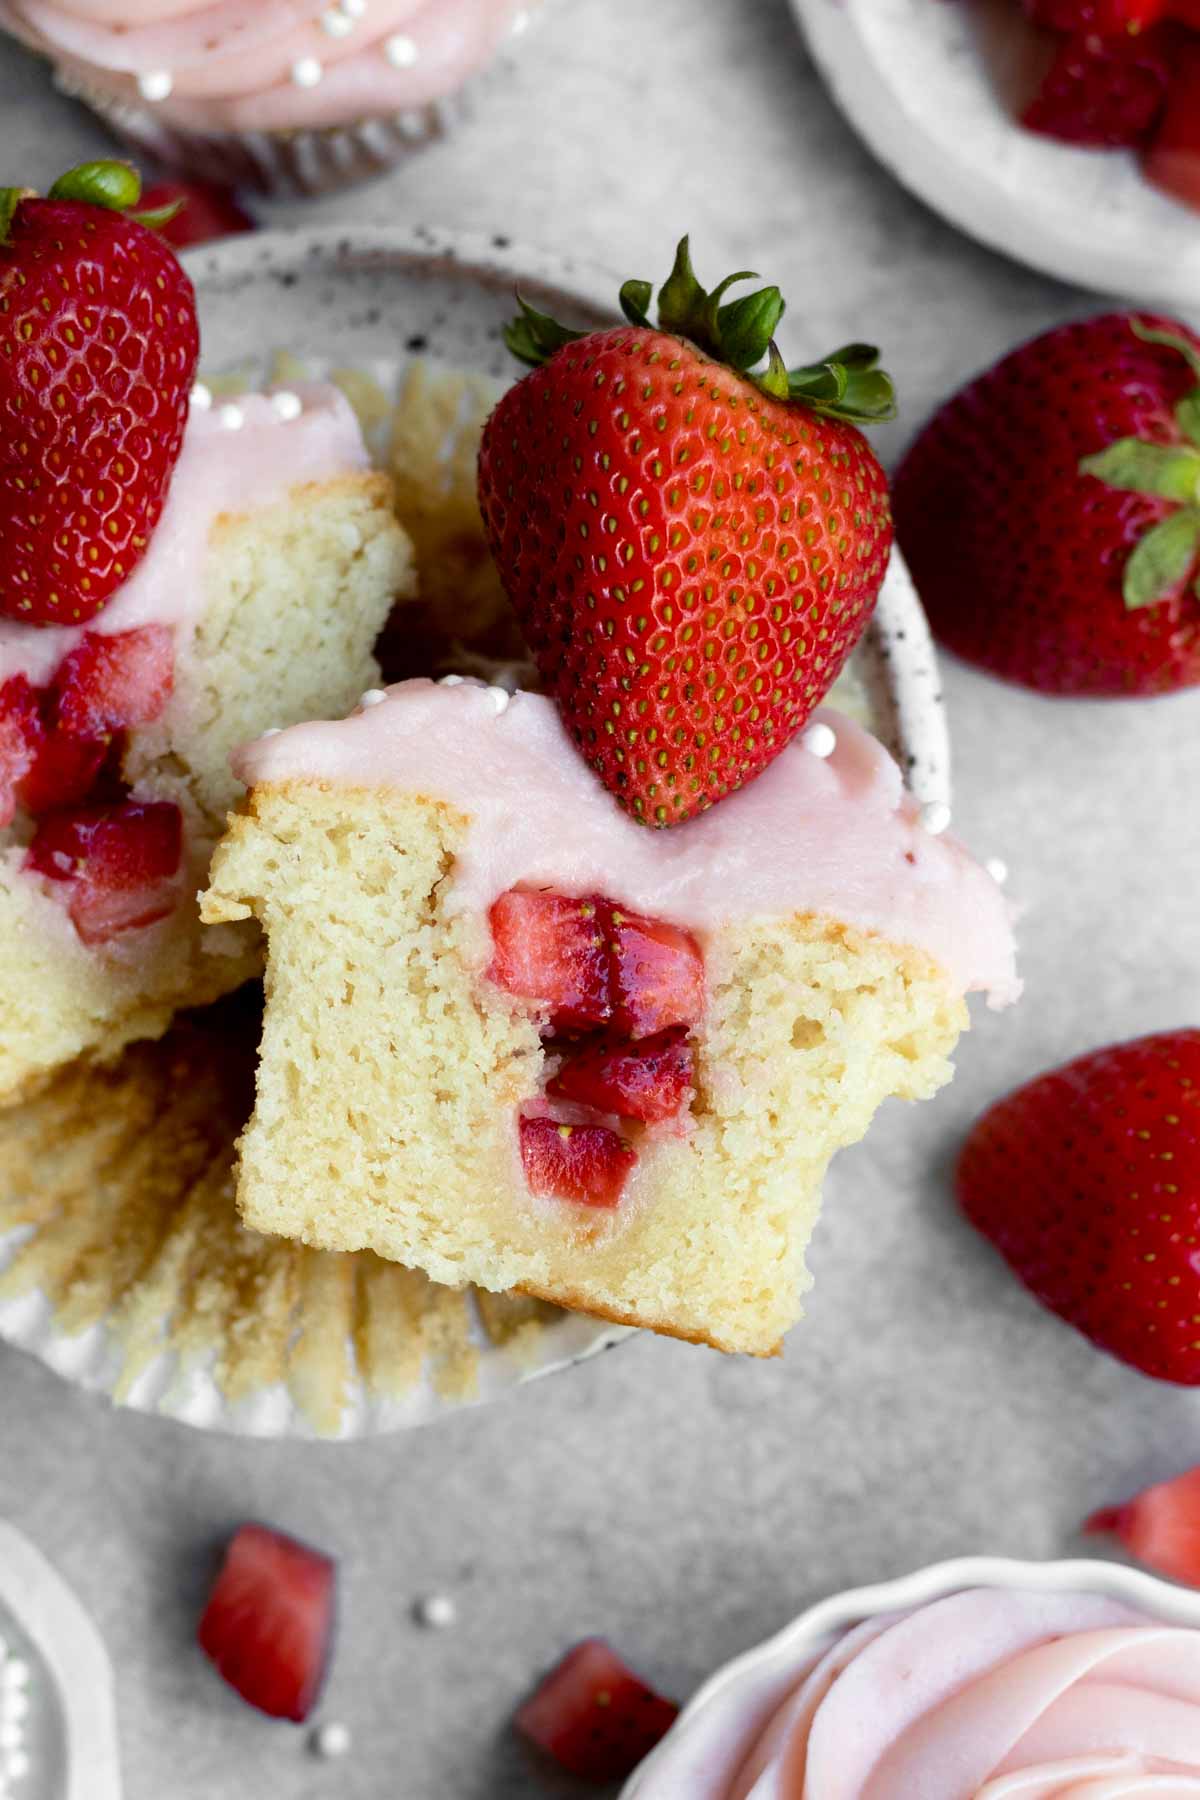 Looking down at a halved fluffy cupcake with strawberry center.